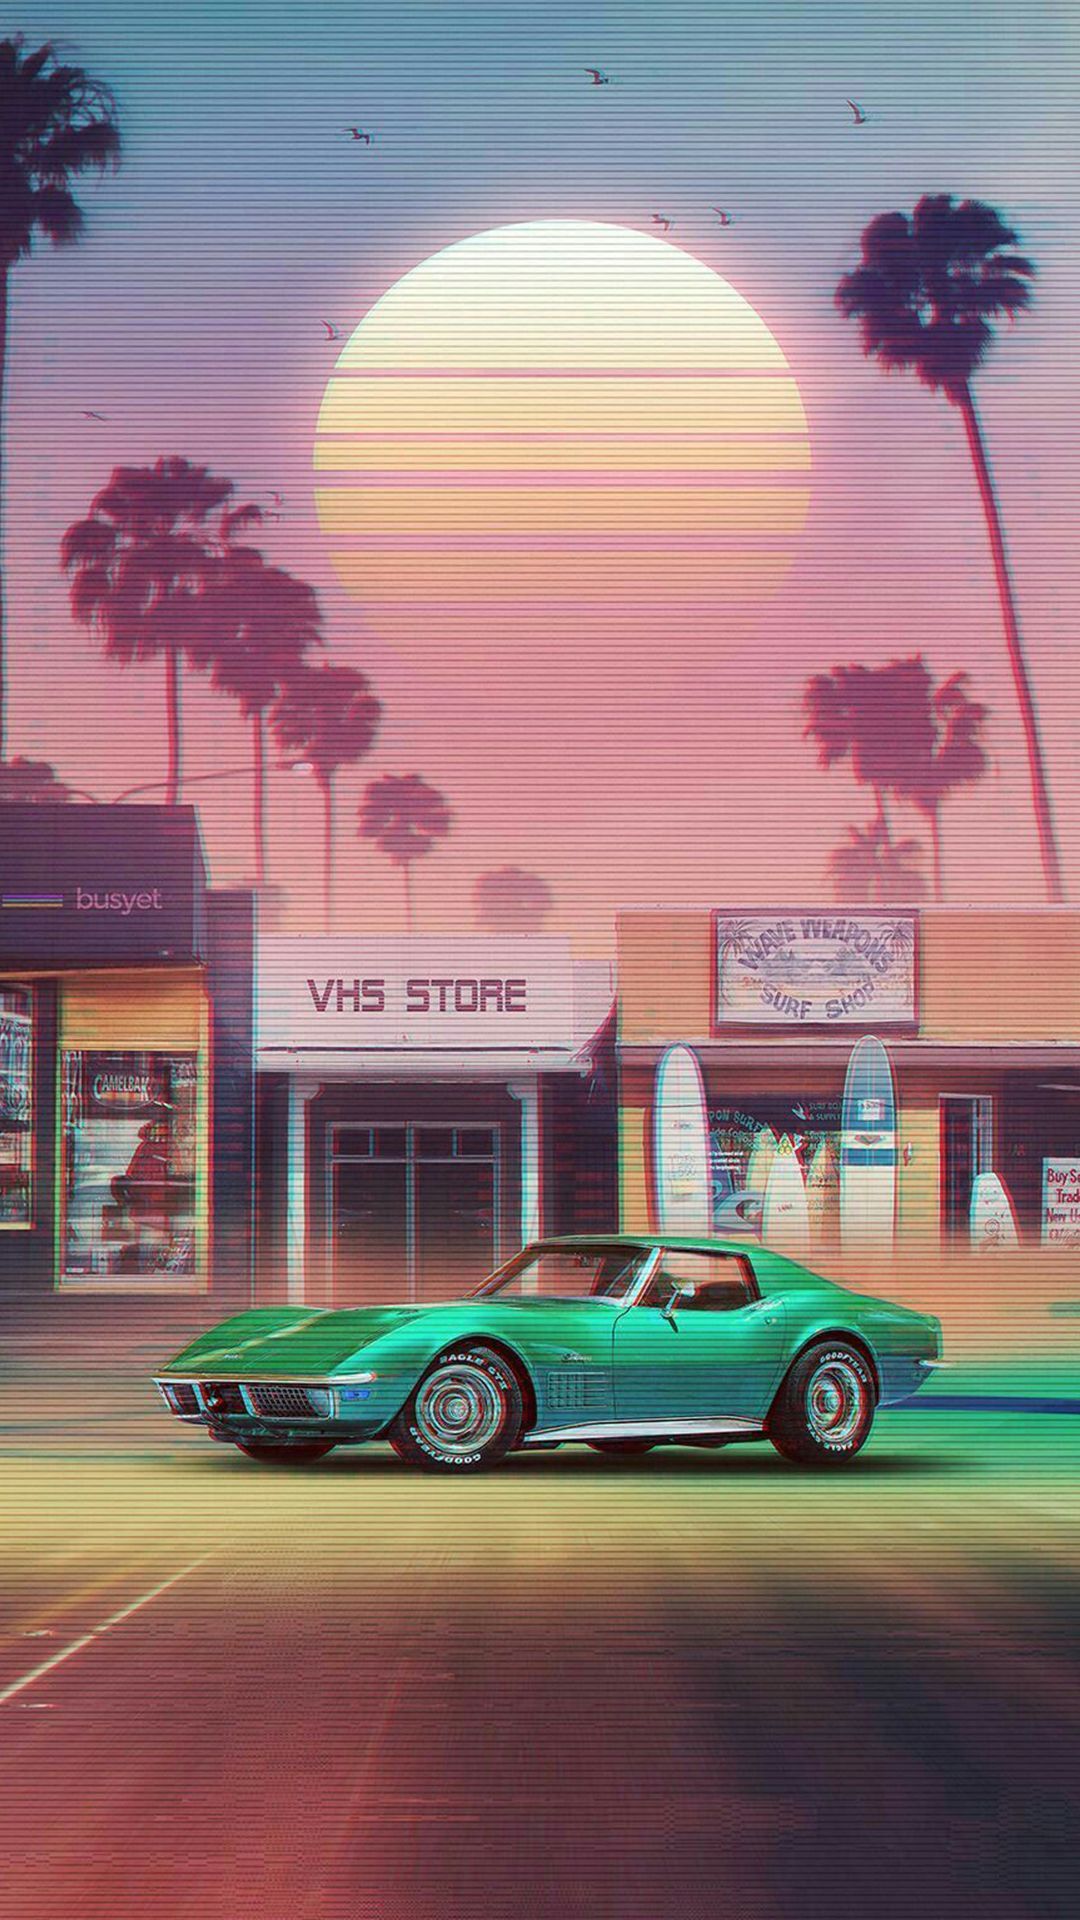 Aesthetic phone wallpaper of a green sports car driving past a store front with palm trees in the background - California, VHS